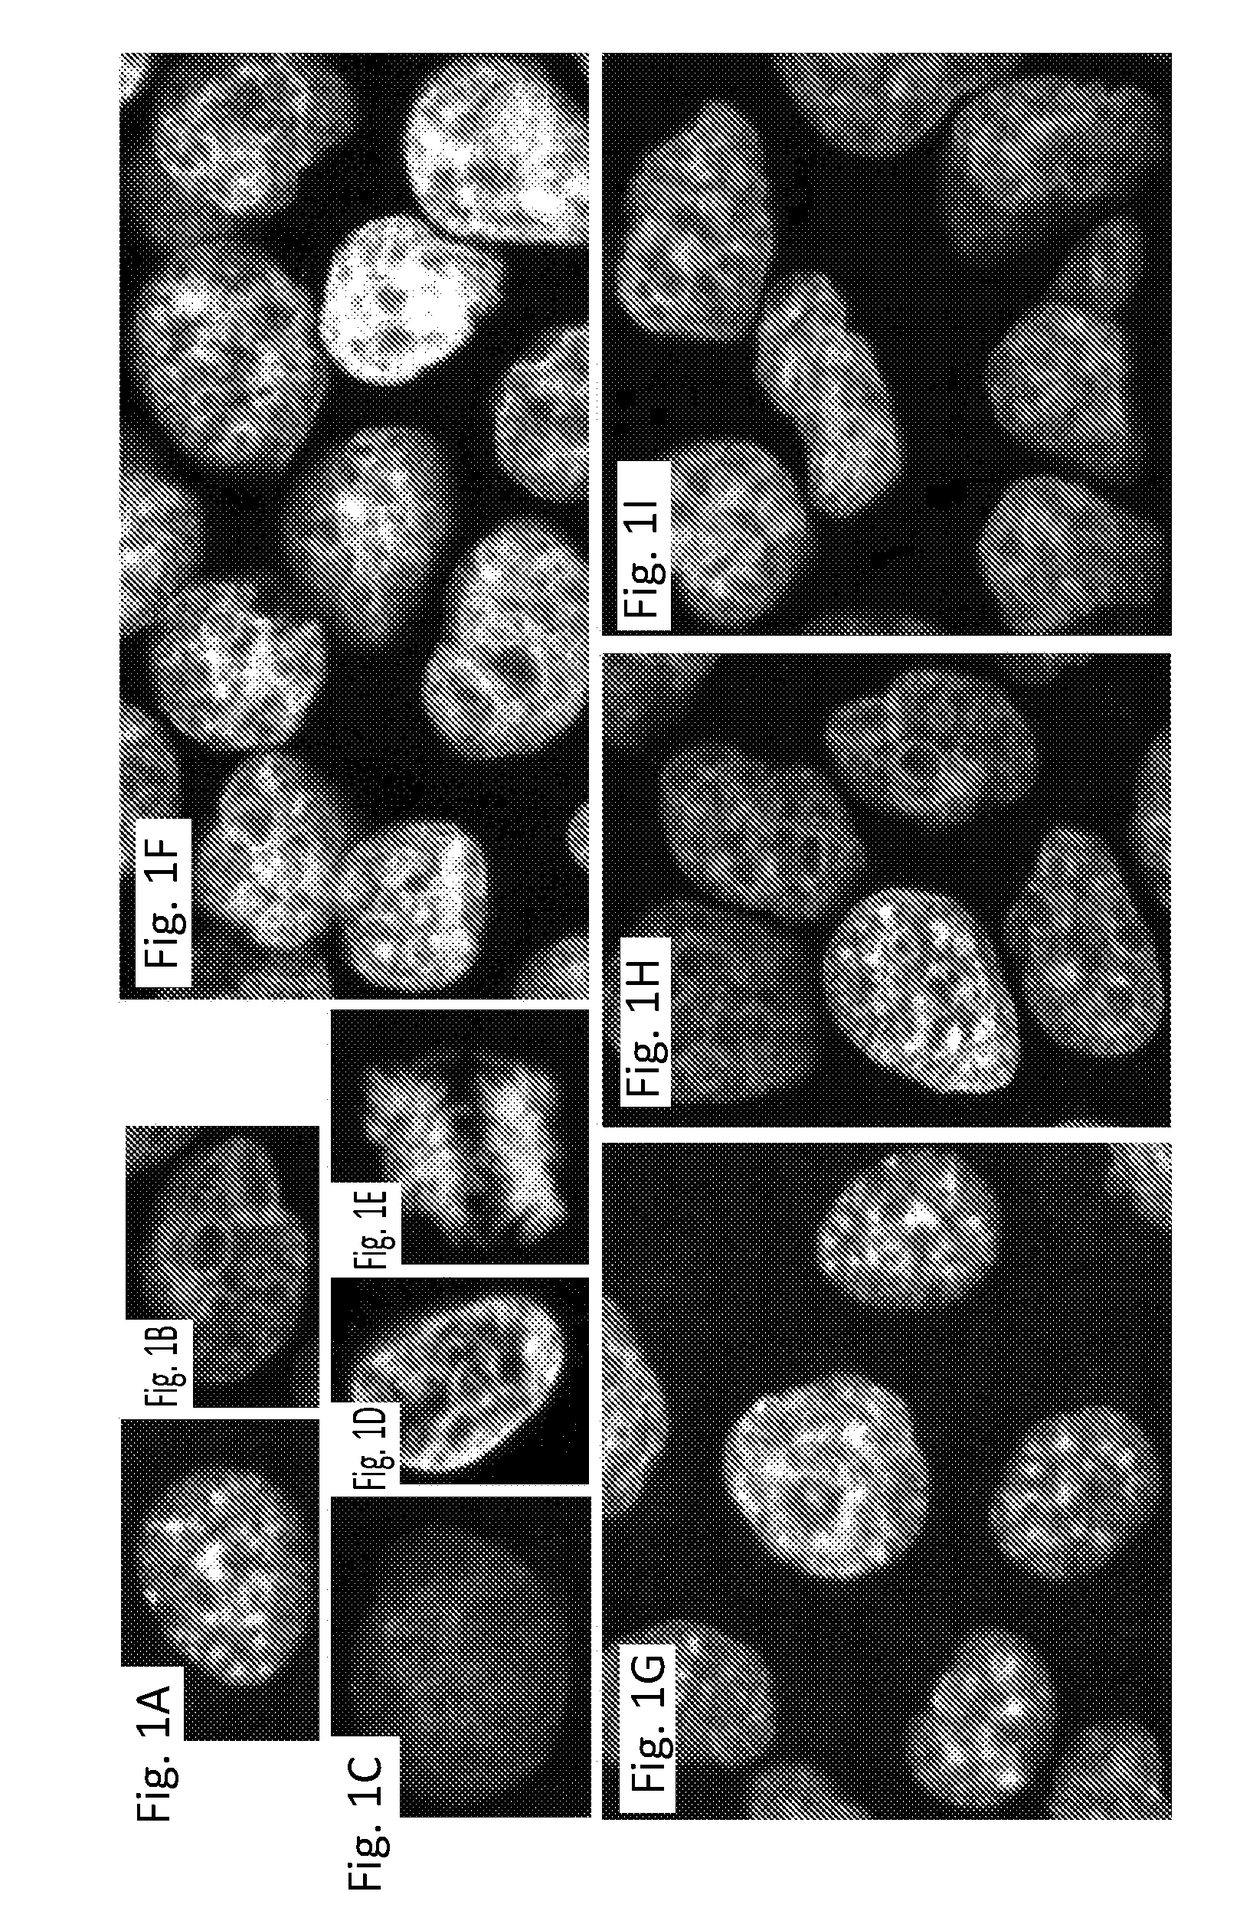 Automated delineation of nuclei for three dimensional (3-d) high content screening